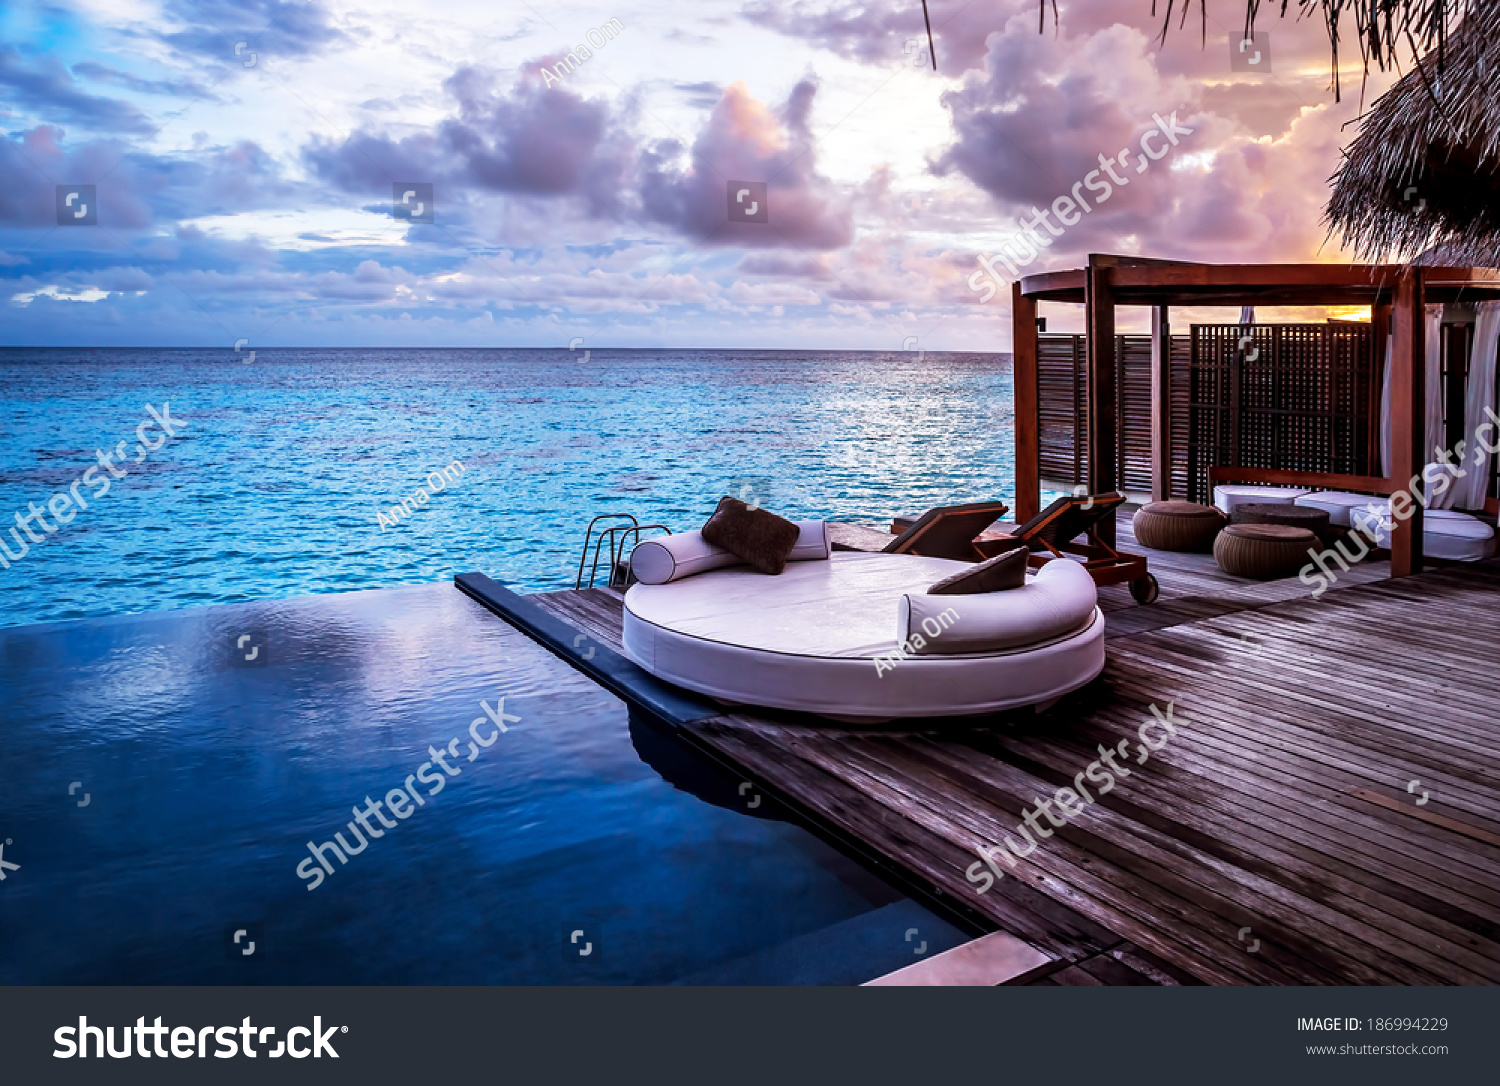 Luxury beach resort, bungalow near endless pool over sea sunset, evening on tropical island, summer vacation concept #186994229